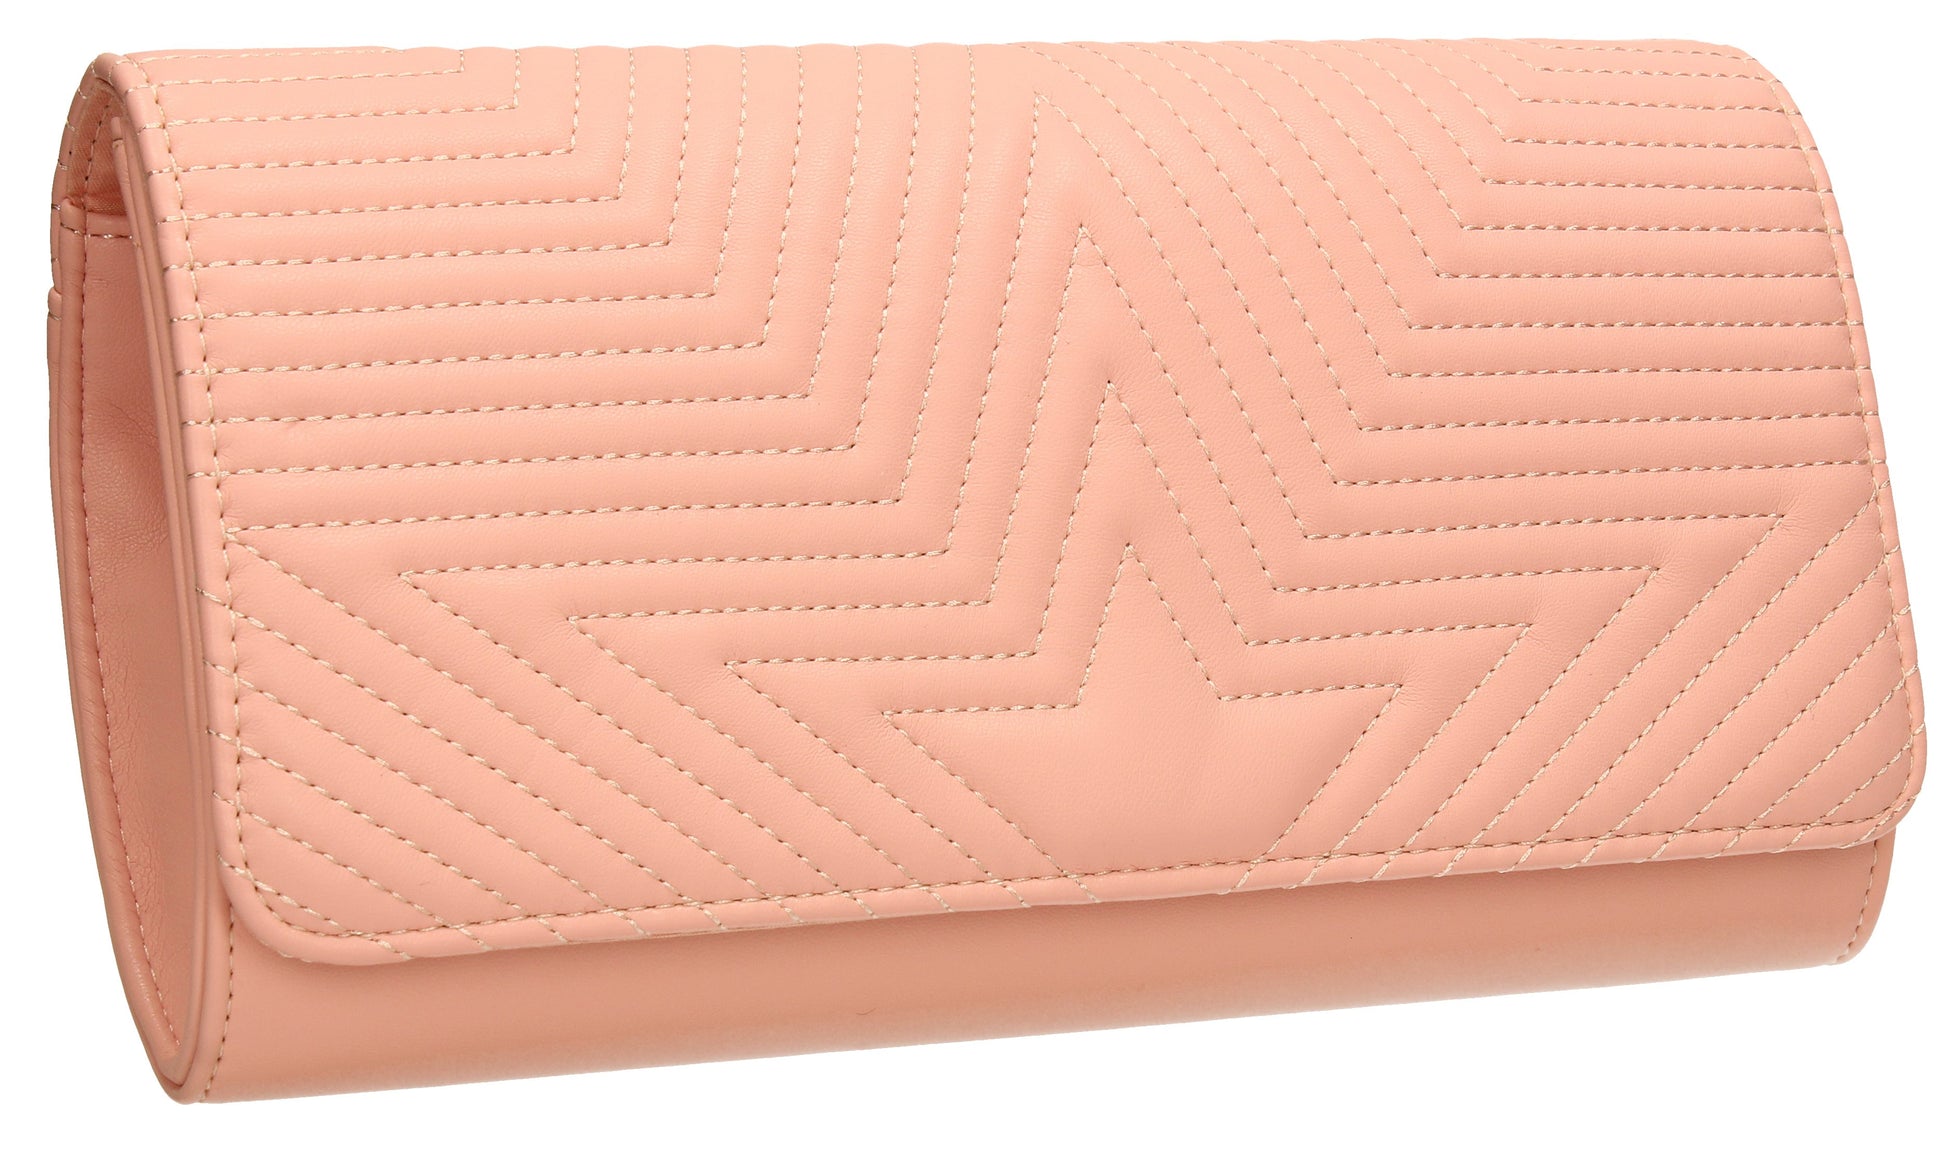 SWANKYSWANS Michelle Clutch Bag Pink Cute Cheap Clutch Bag For Weddings School and Work